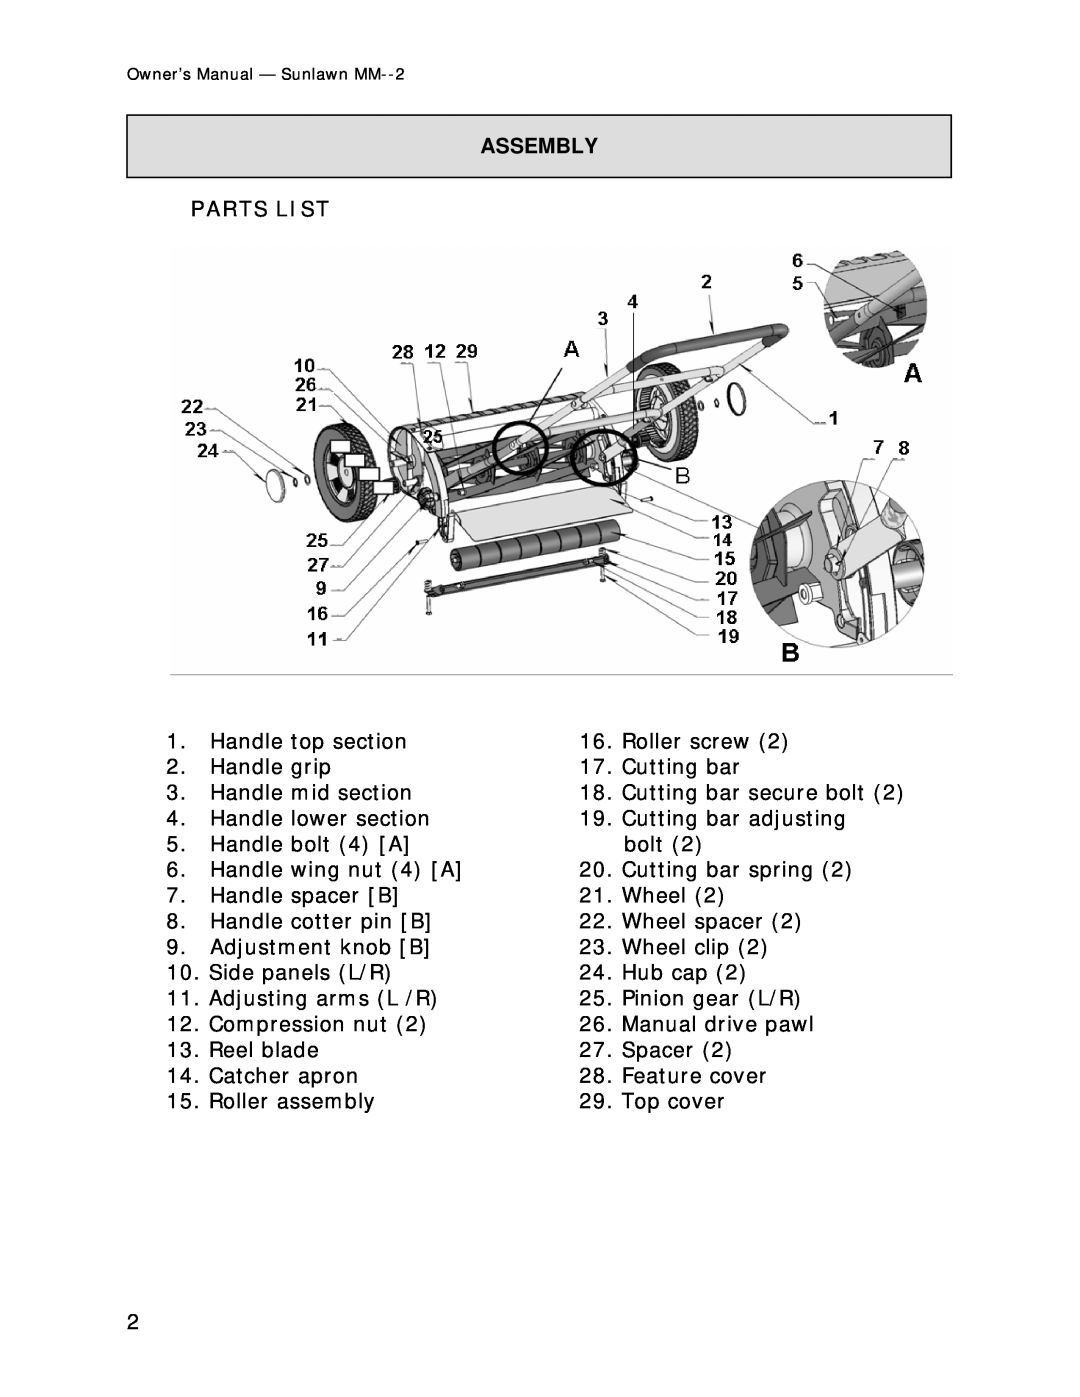 Sun Lawn MM-2 owner manual Parts List, Assembly 